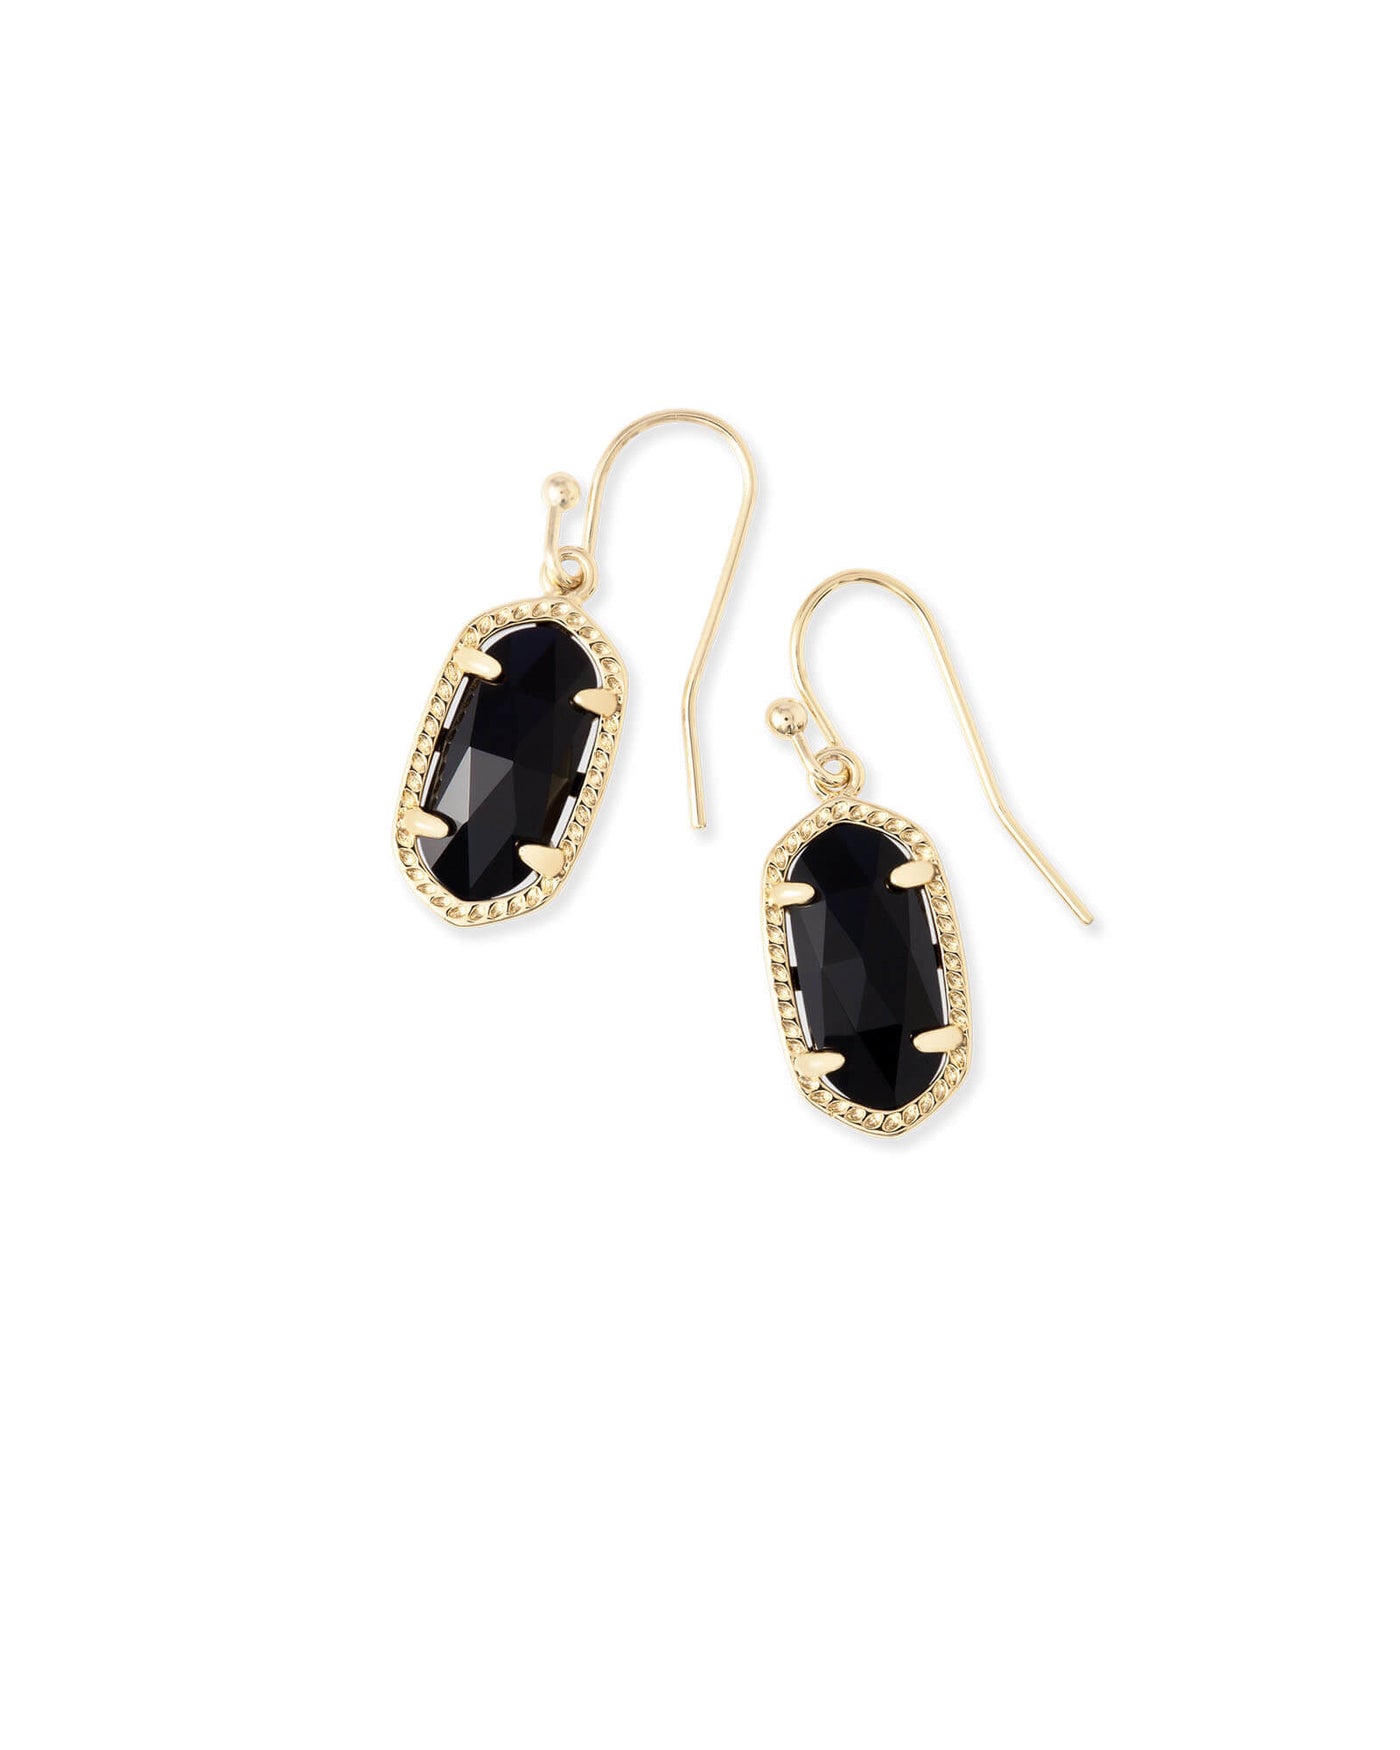 Kendra Scott Lee Gold Drop Earrings in Black Opaque Glass-Earrings-Kendra Scott-Market Street Nest, Fashionable Clothing, Shoes and Home Décor Located in Mabank, TX